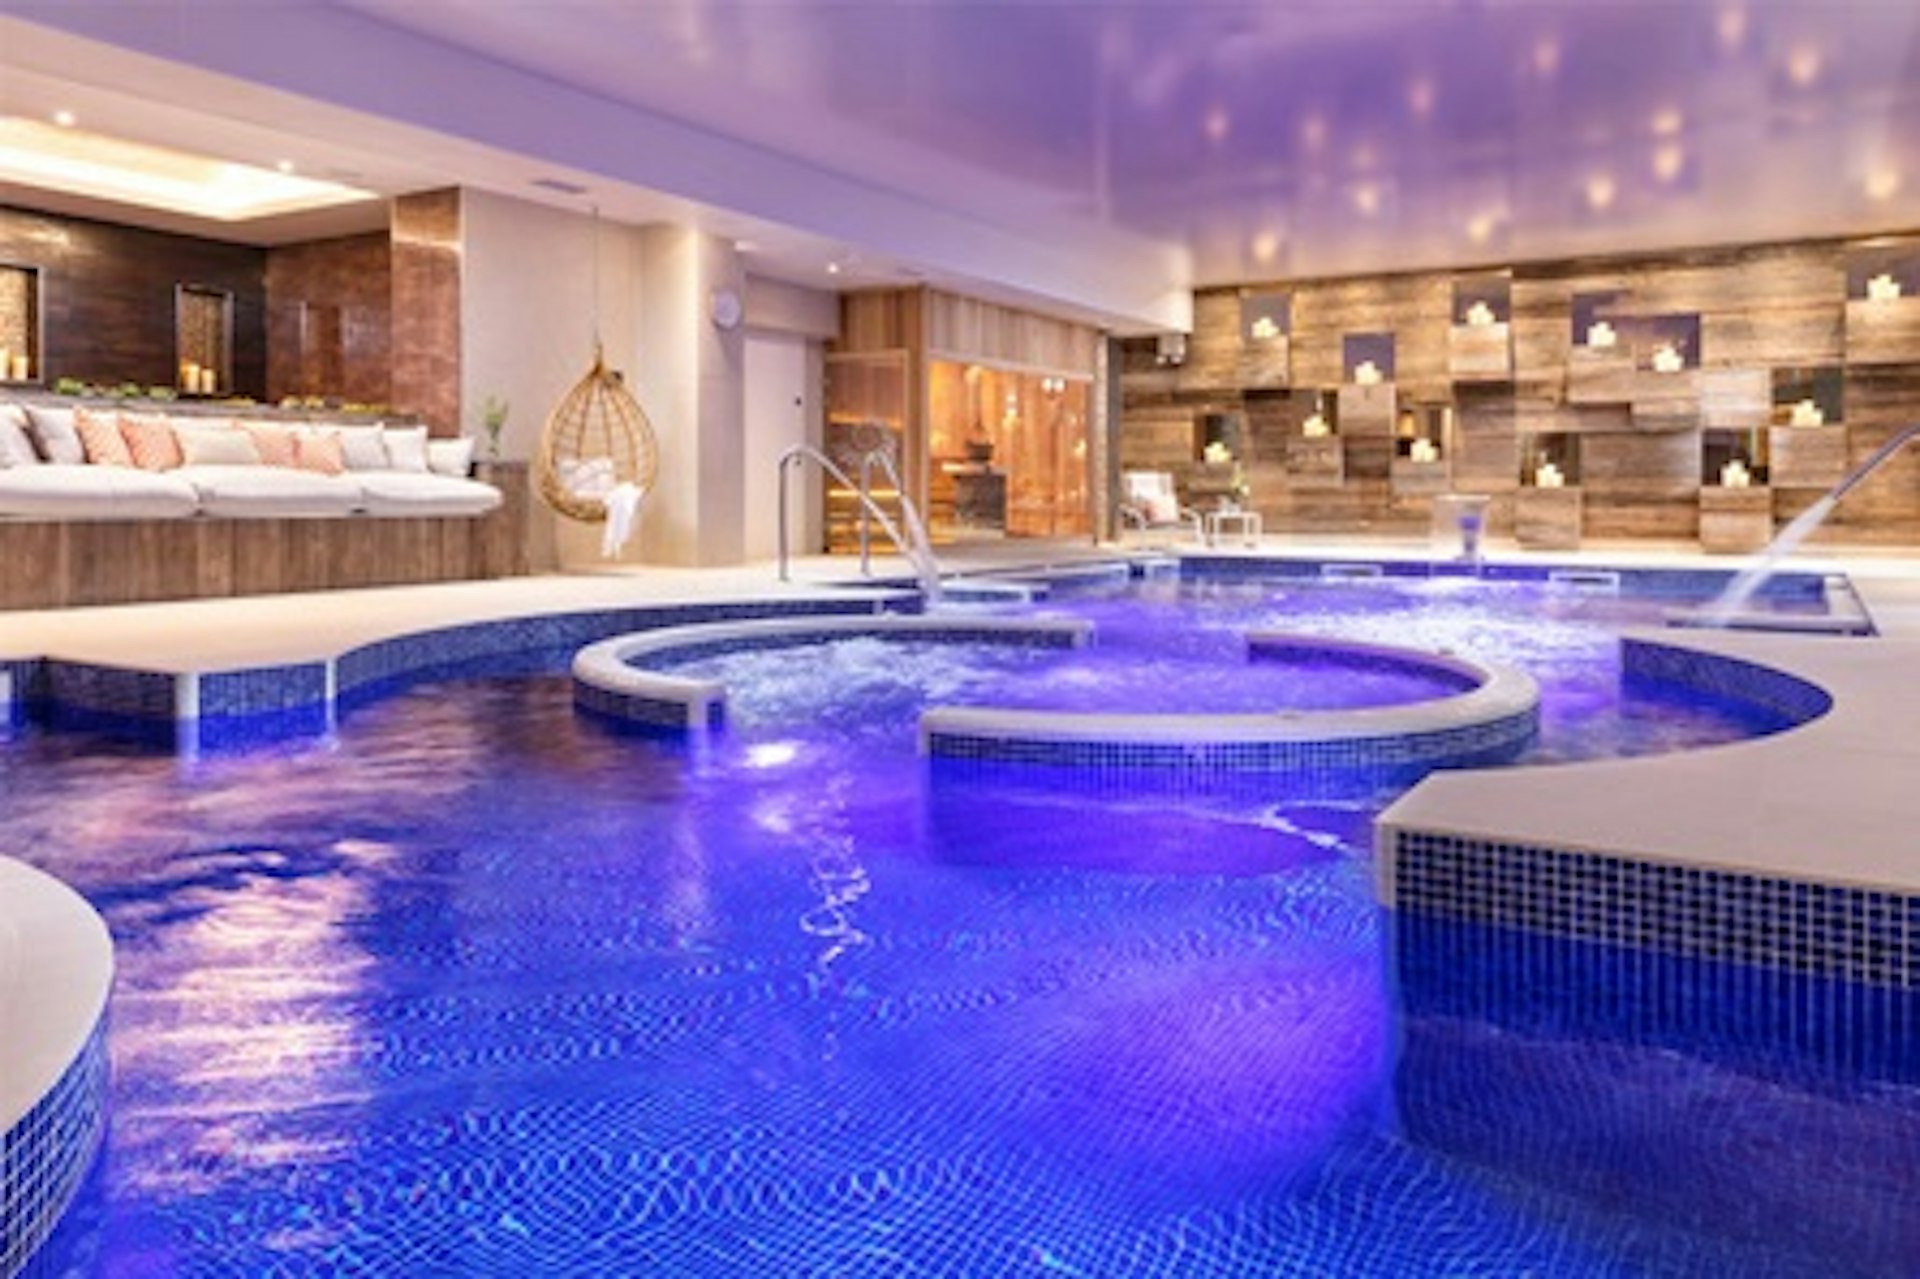 One Night Spa Break with Dinner and Treatment for Two at the Luxury 4* St Michaels Resort, Falmouth 3